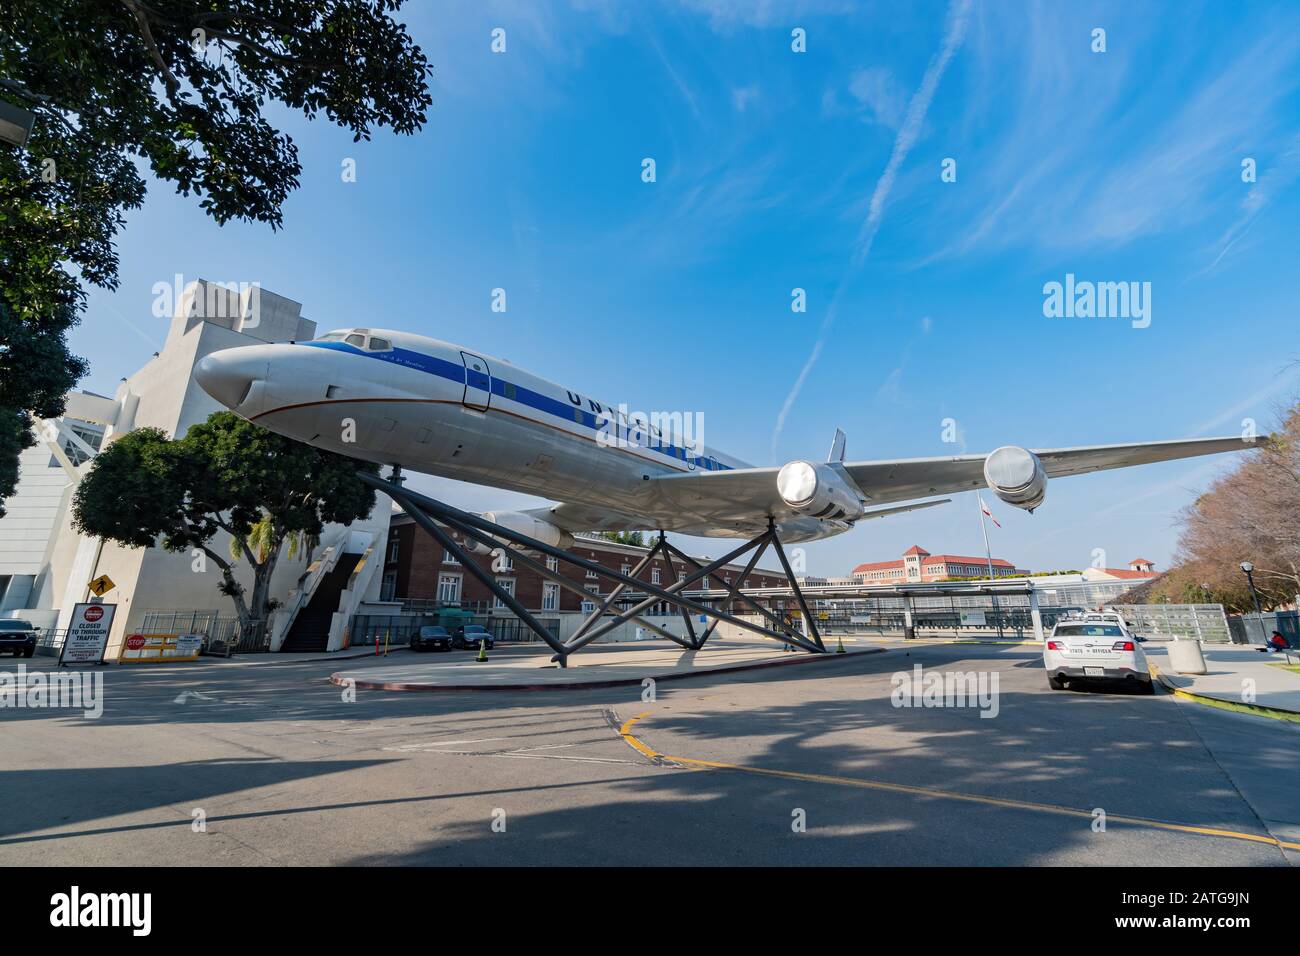 Los Angeles, Jan 15: Afternoon sunny view of the Douglas DC-8 airplane on JAN 15, 2020 at Los Angeles, California Stock Photo